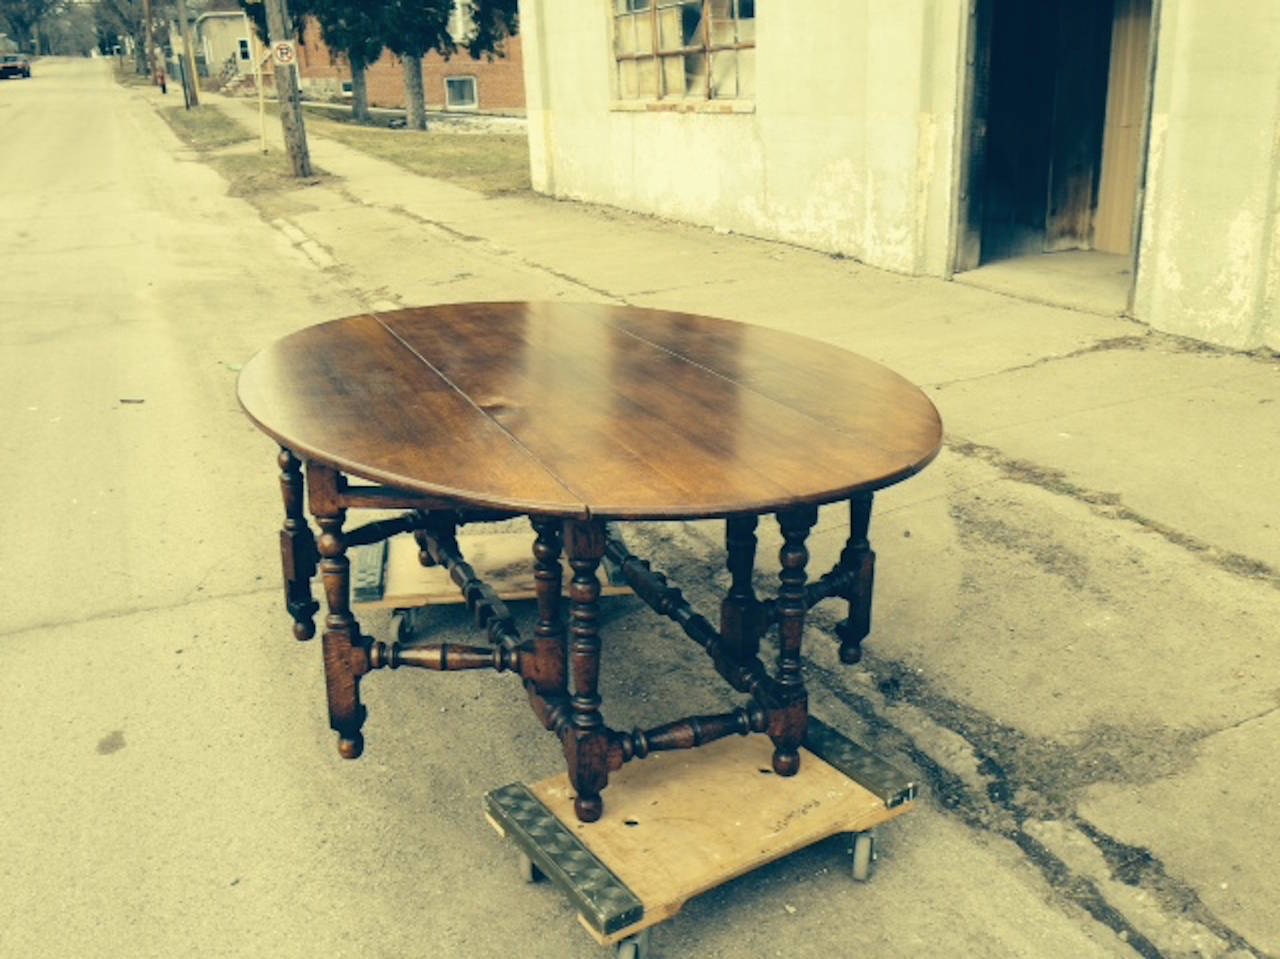 English, Handcrafted 17th Century Style Drop-Leaf Table 3